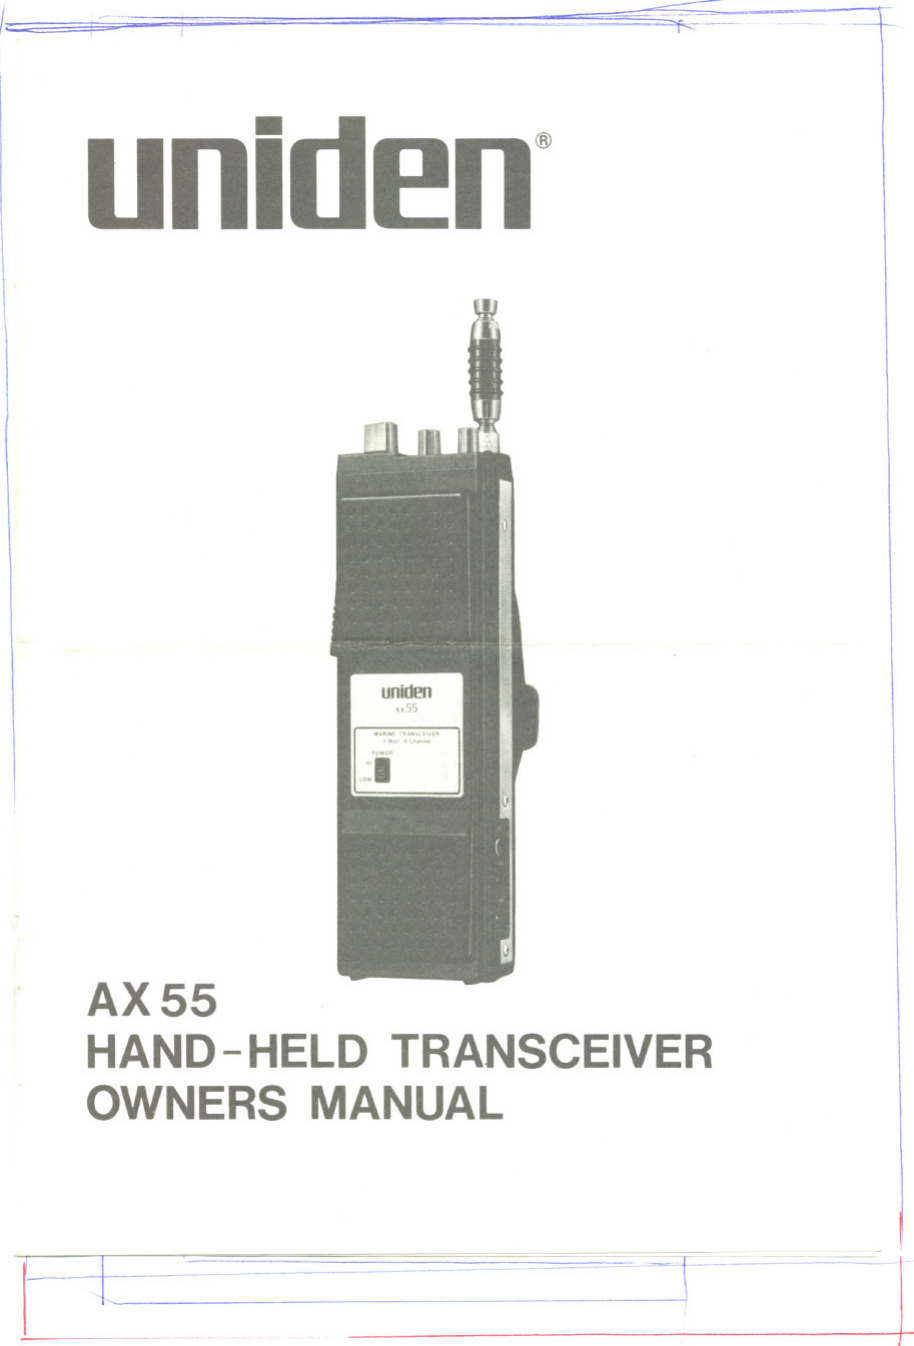 Page 1 of 8 - Uniden Uniden-Ax55-Users-Manual-  Uniden-ax55-users-manual